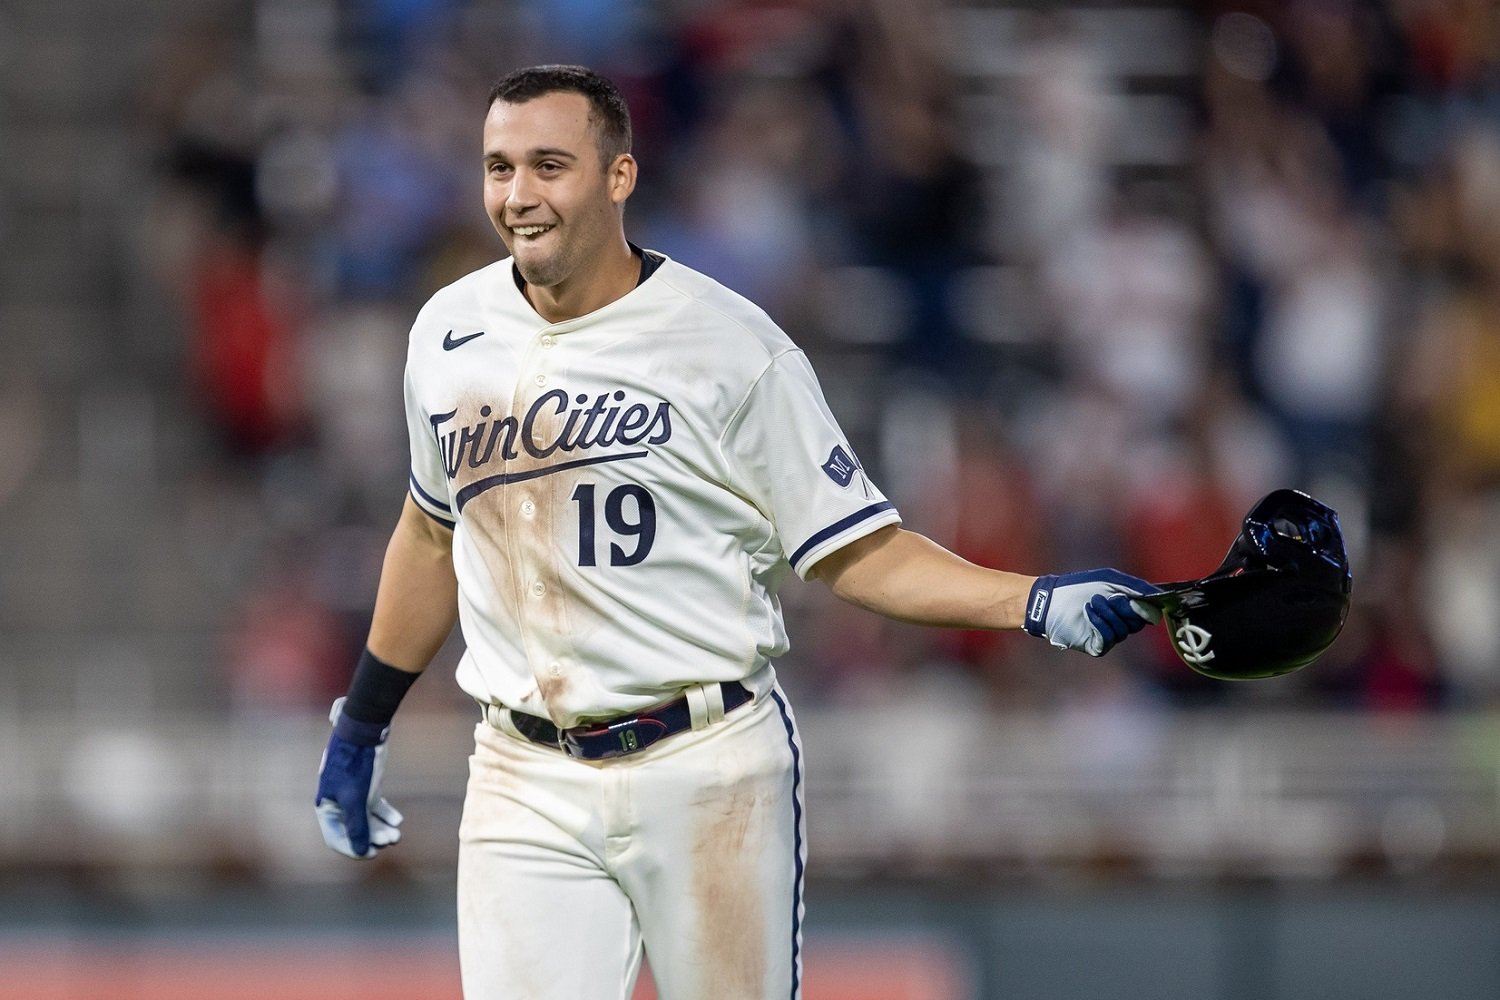 2022 Fantasy Baseball Player Spotlight: Is Now the Time to Sell